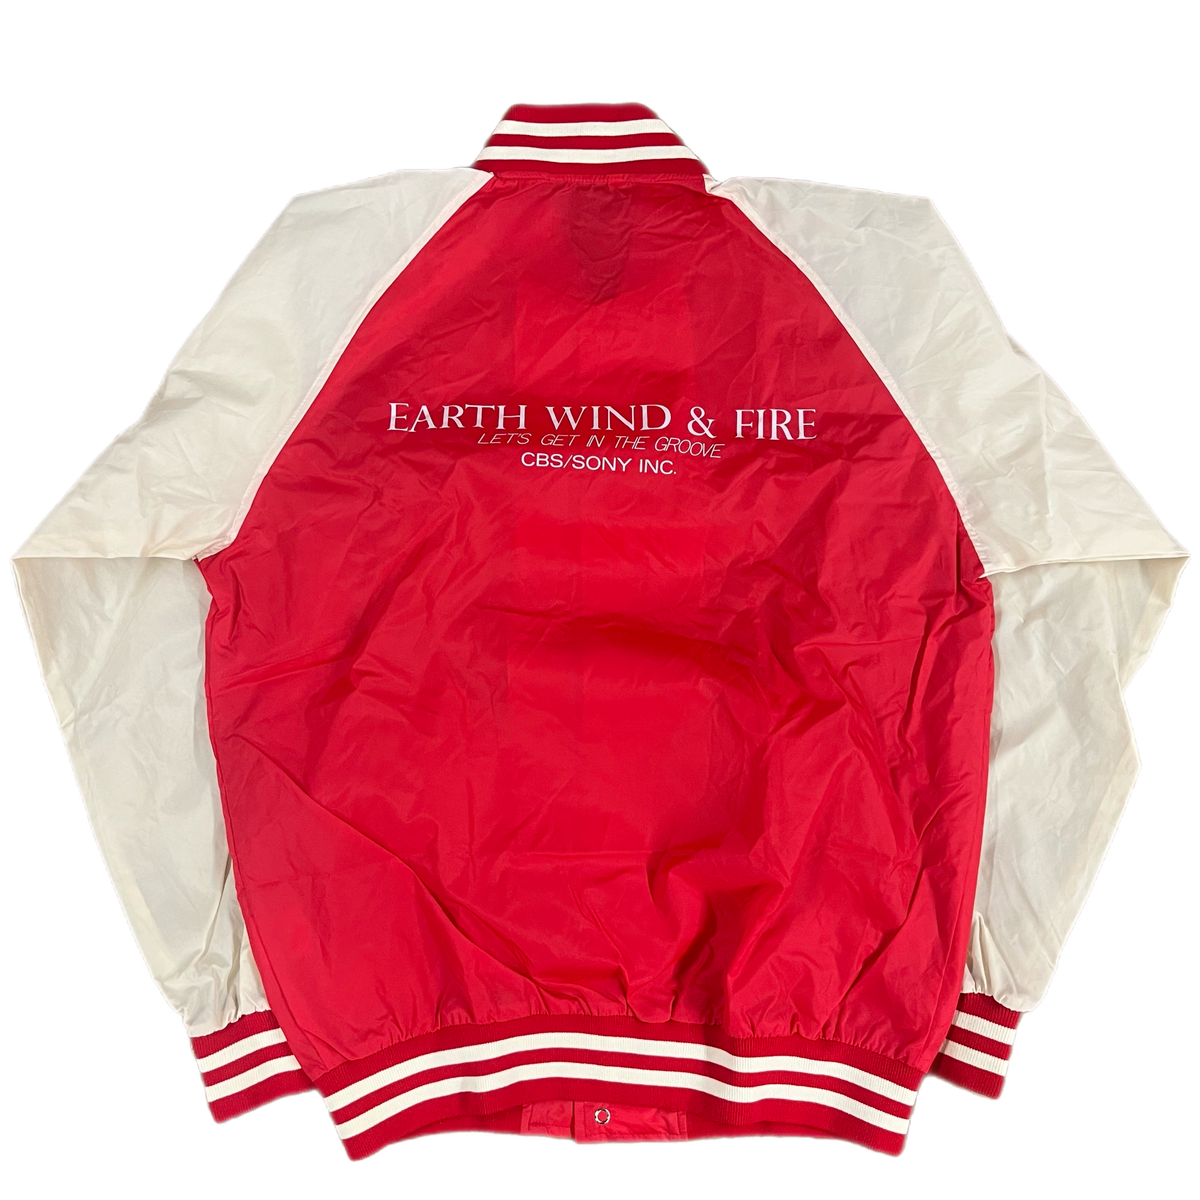 Vintage Earth, Wind &amp; Fire &quot;Lets Get In The Groove&quot; CBS/SONY Inc. Promotional Jacket